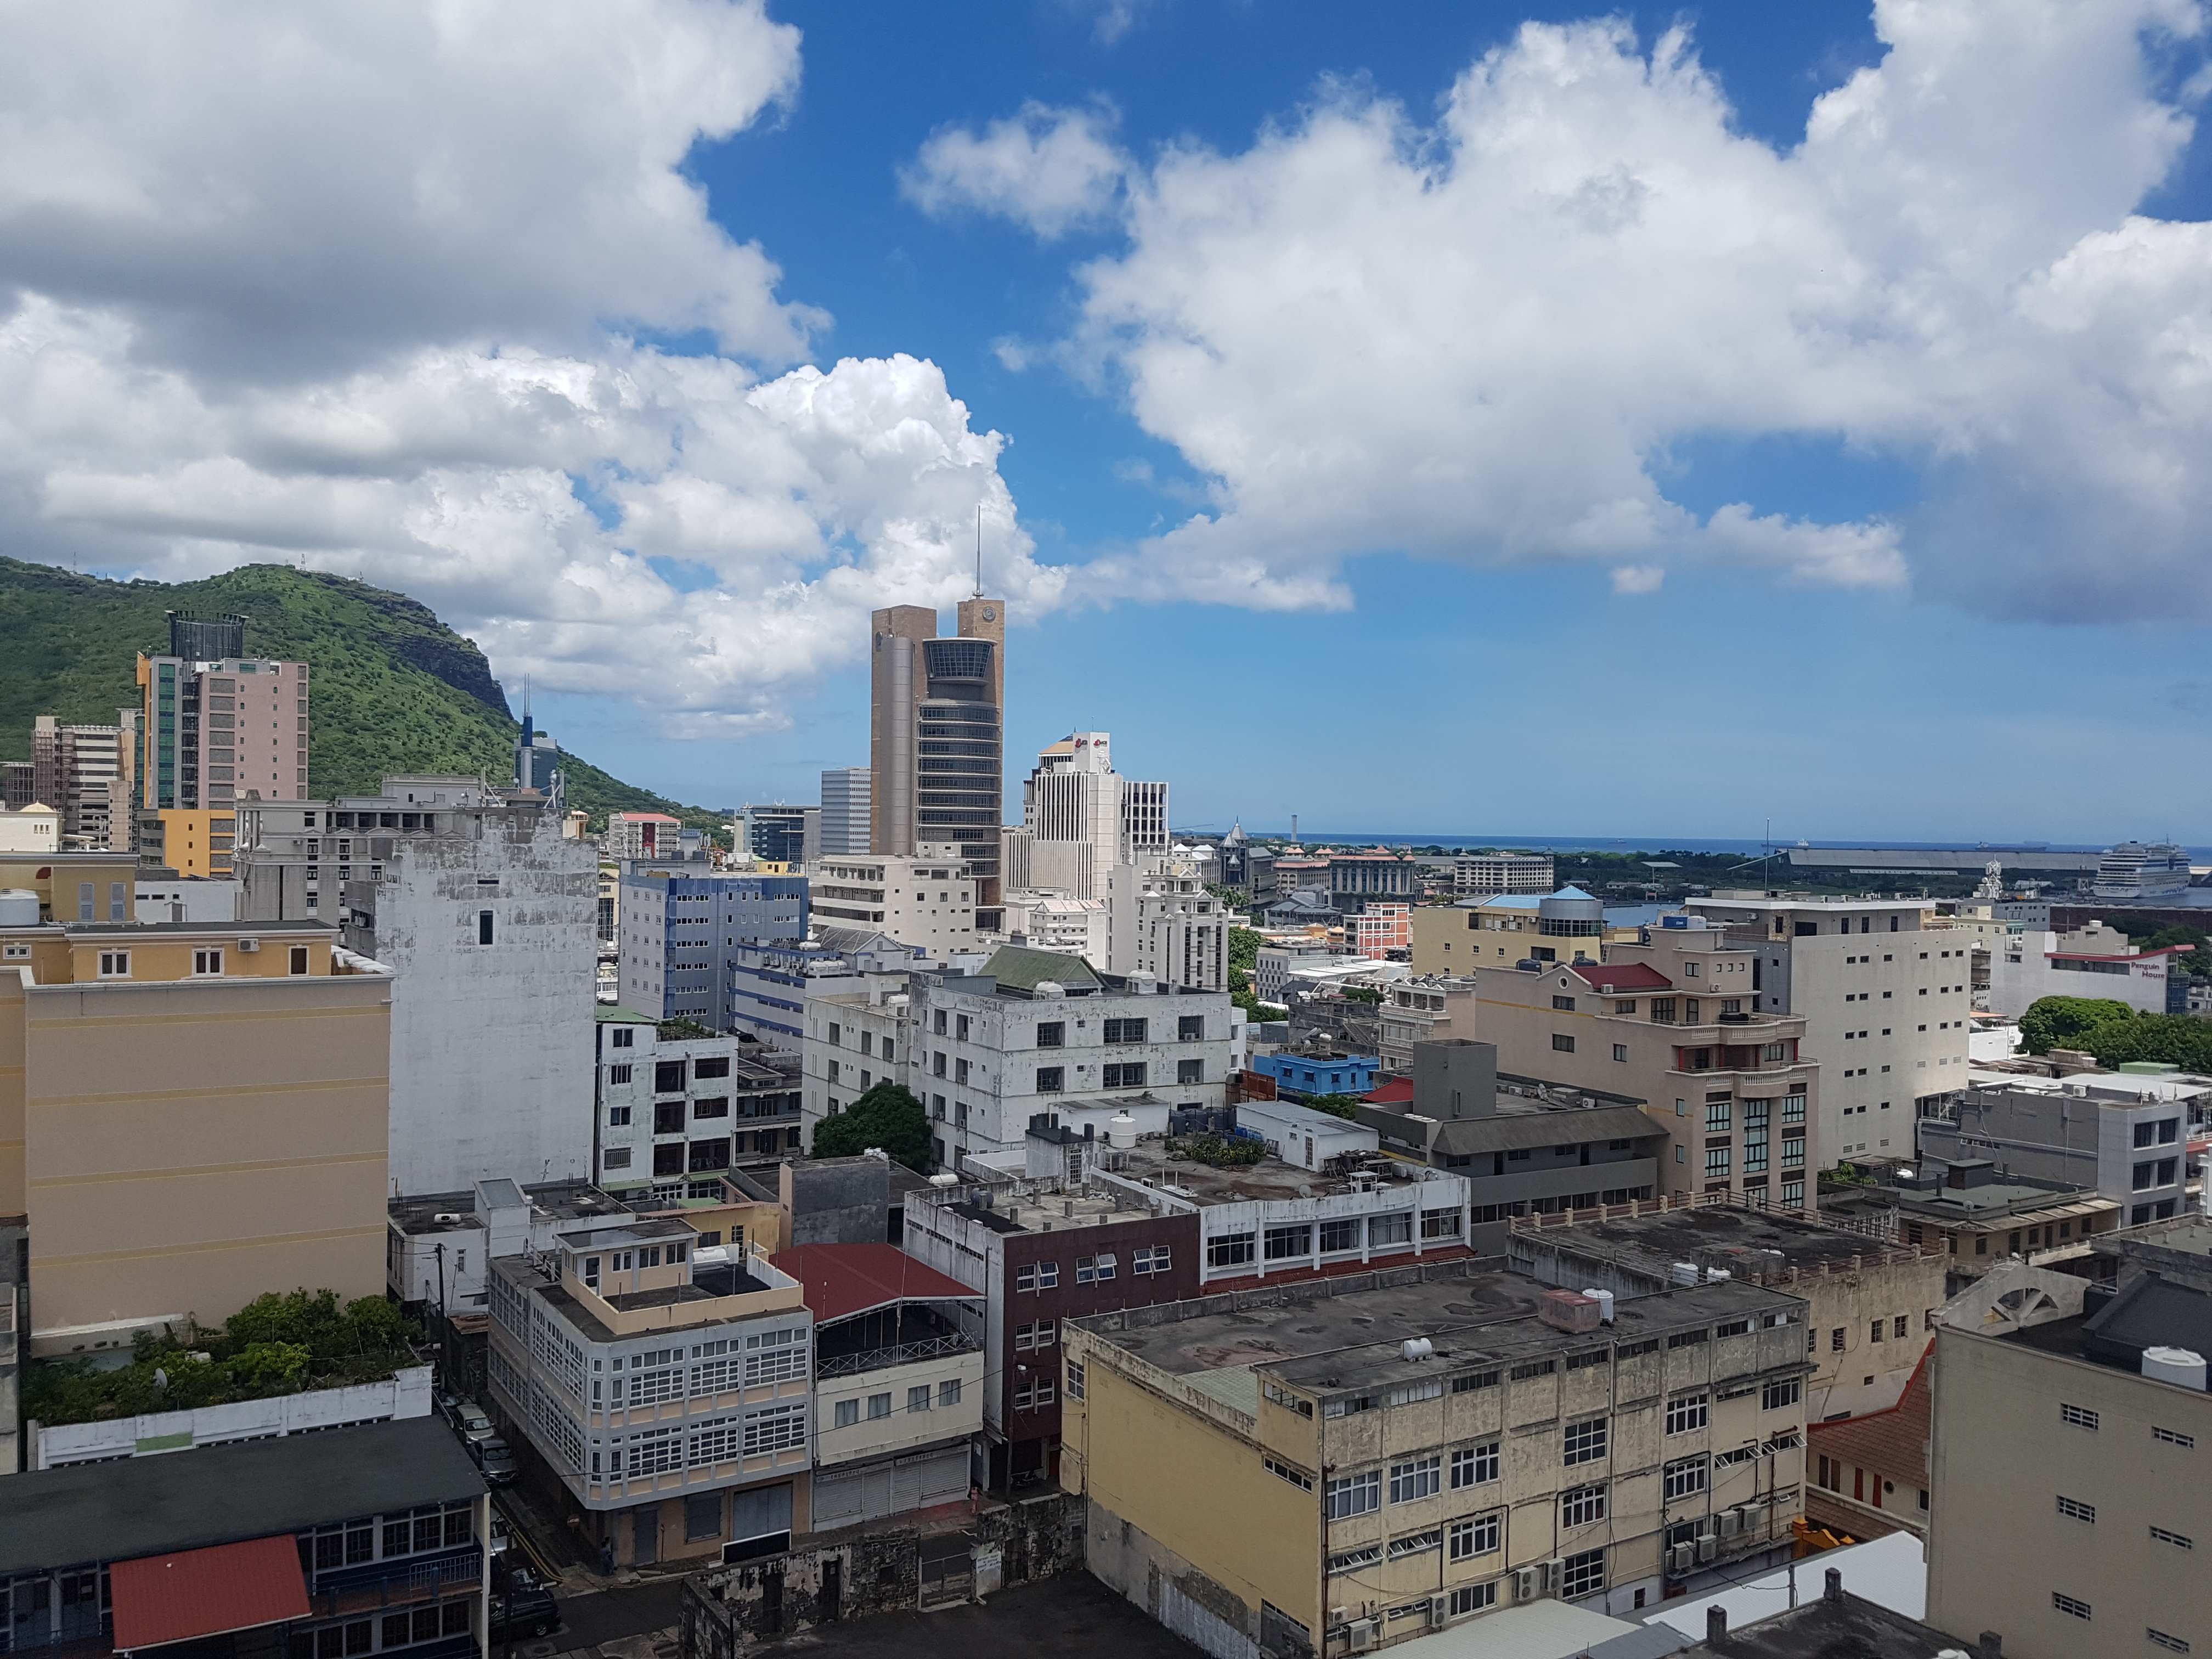 The city of Port-Louis, Mauritius